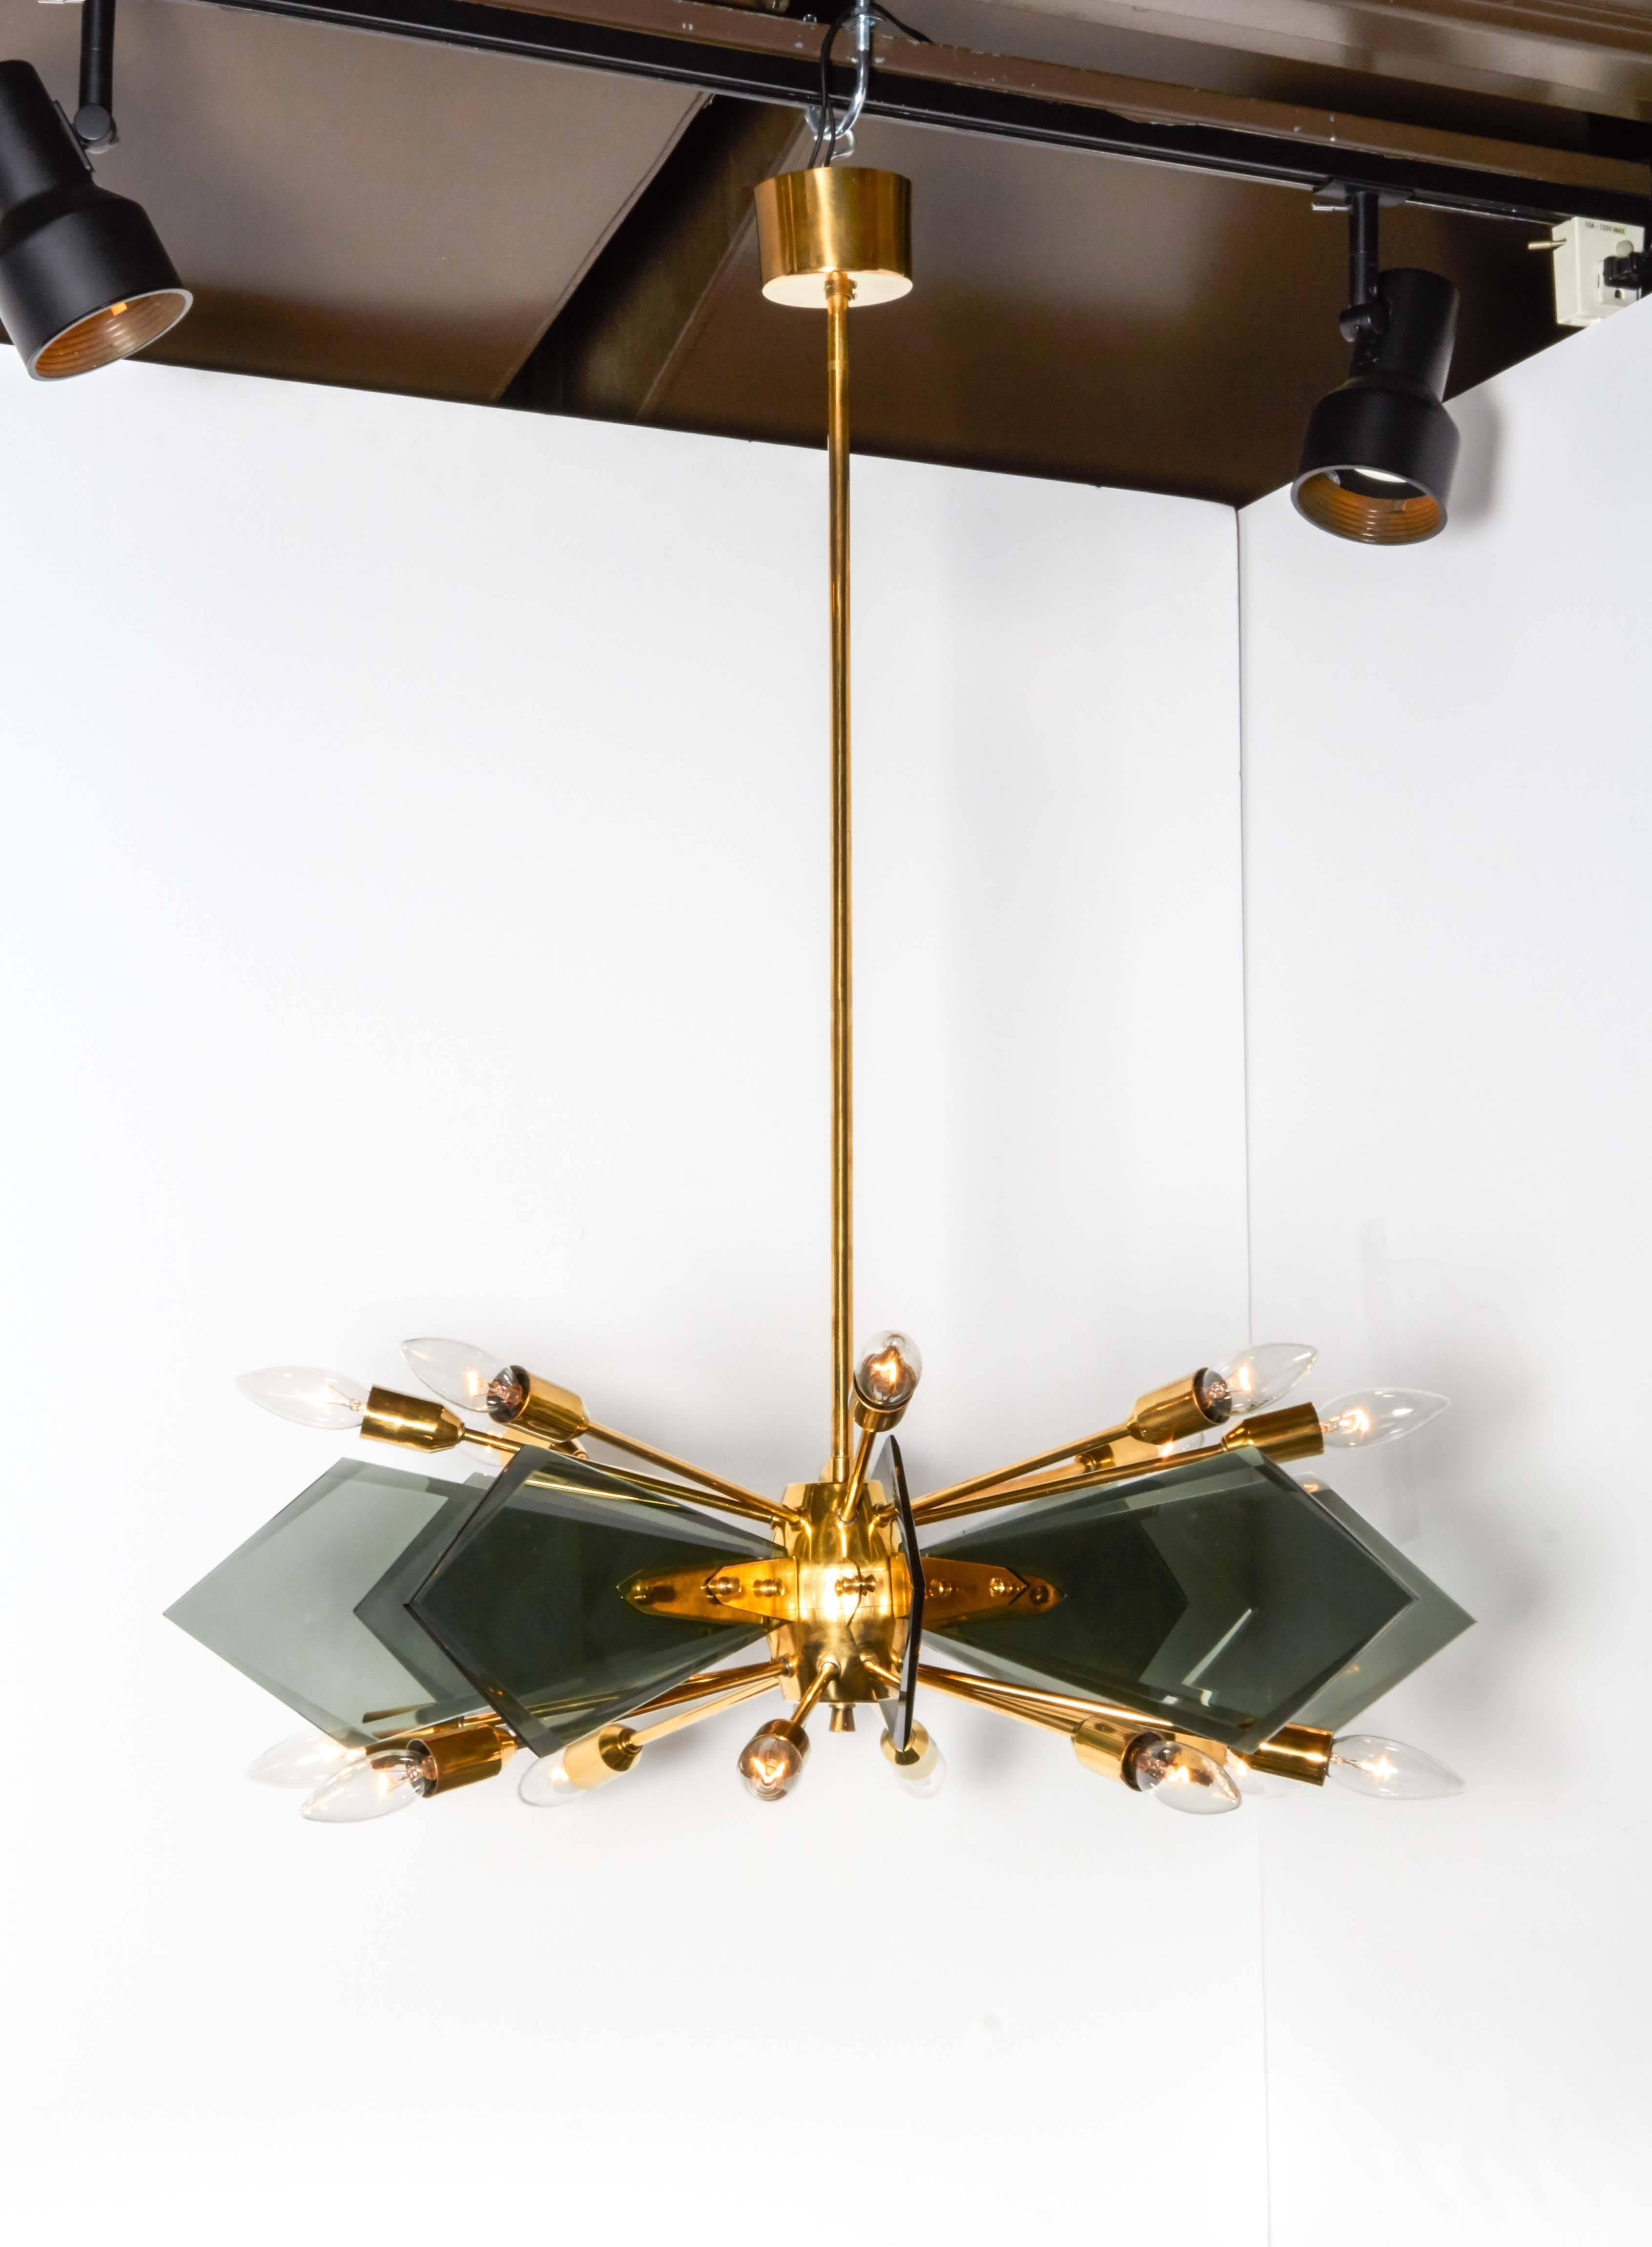 Exceptional Italian Mid-Century Modern sputnik light fixture. Comprised of a long stem brass frame with central orb and stylized fittings.  Features 16 Sputnik arms (eight on the top tier and eight on the lower tier), each fitted with an individual